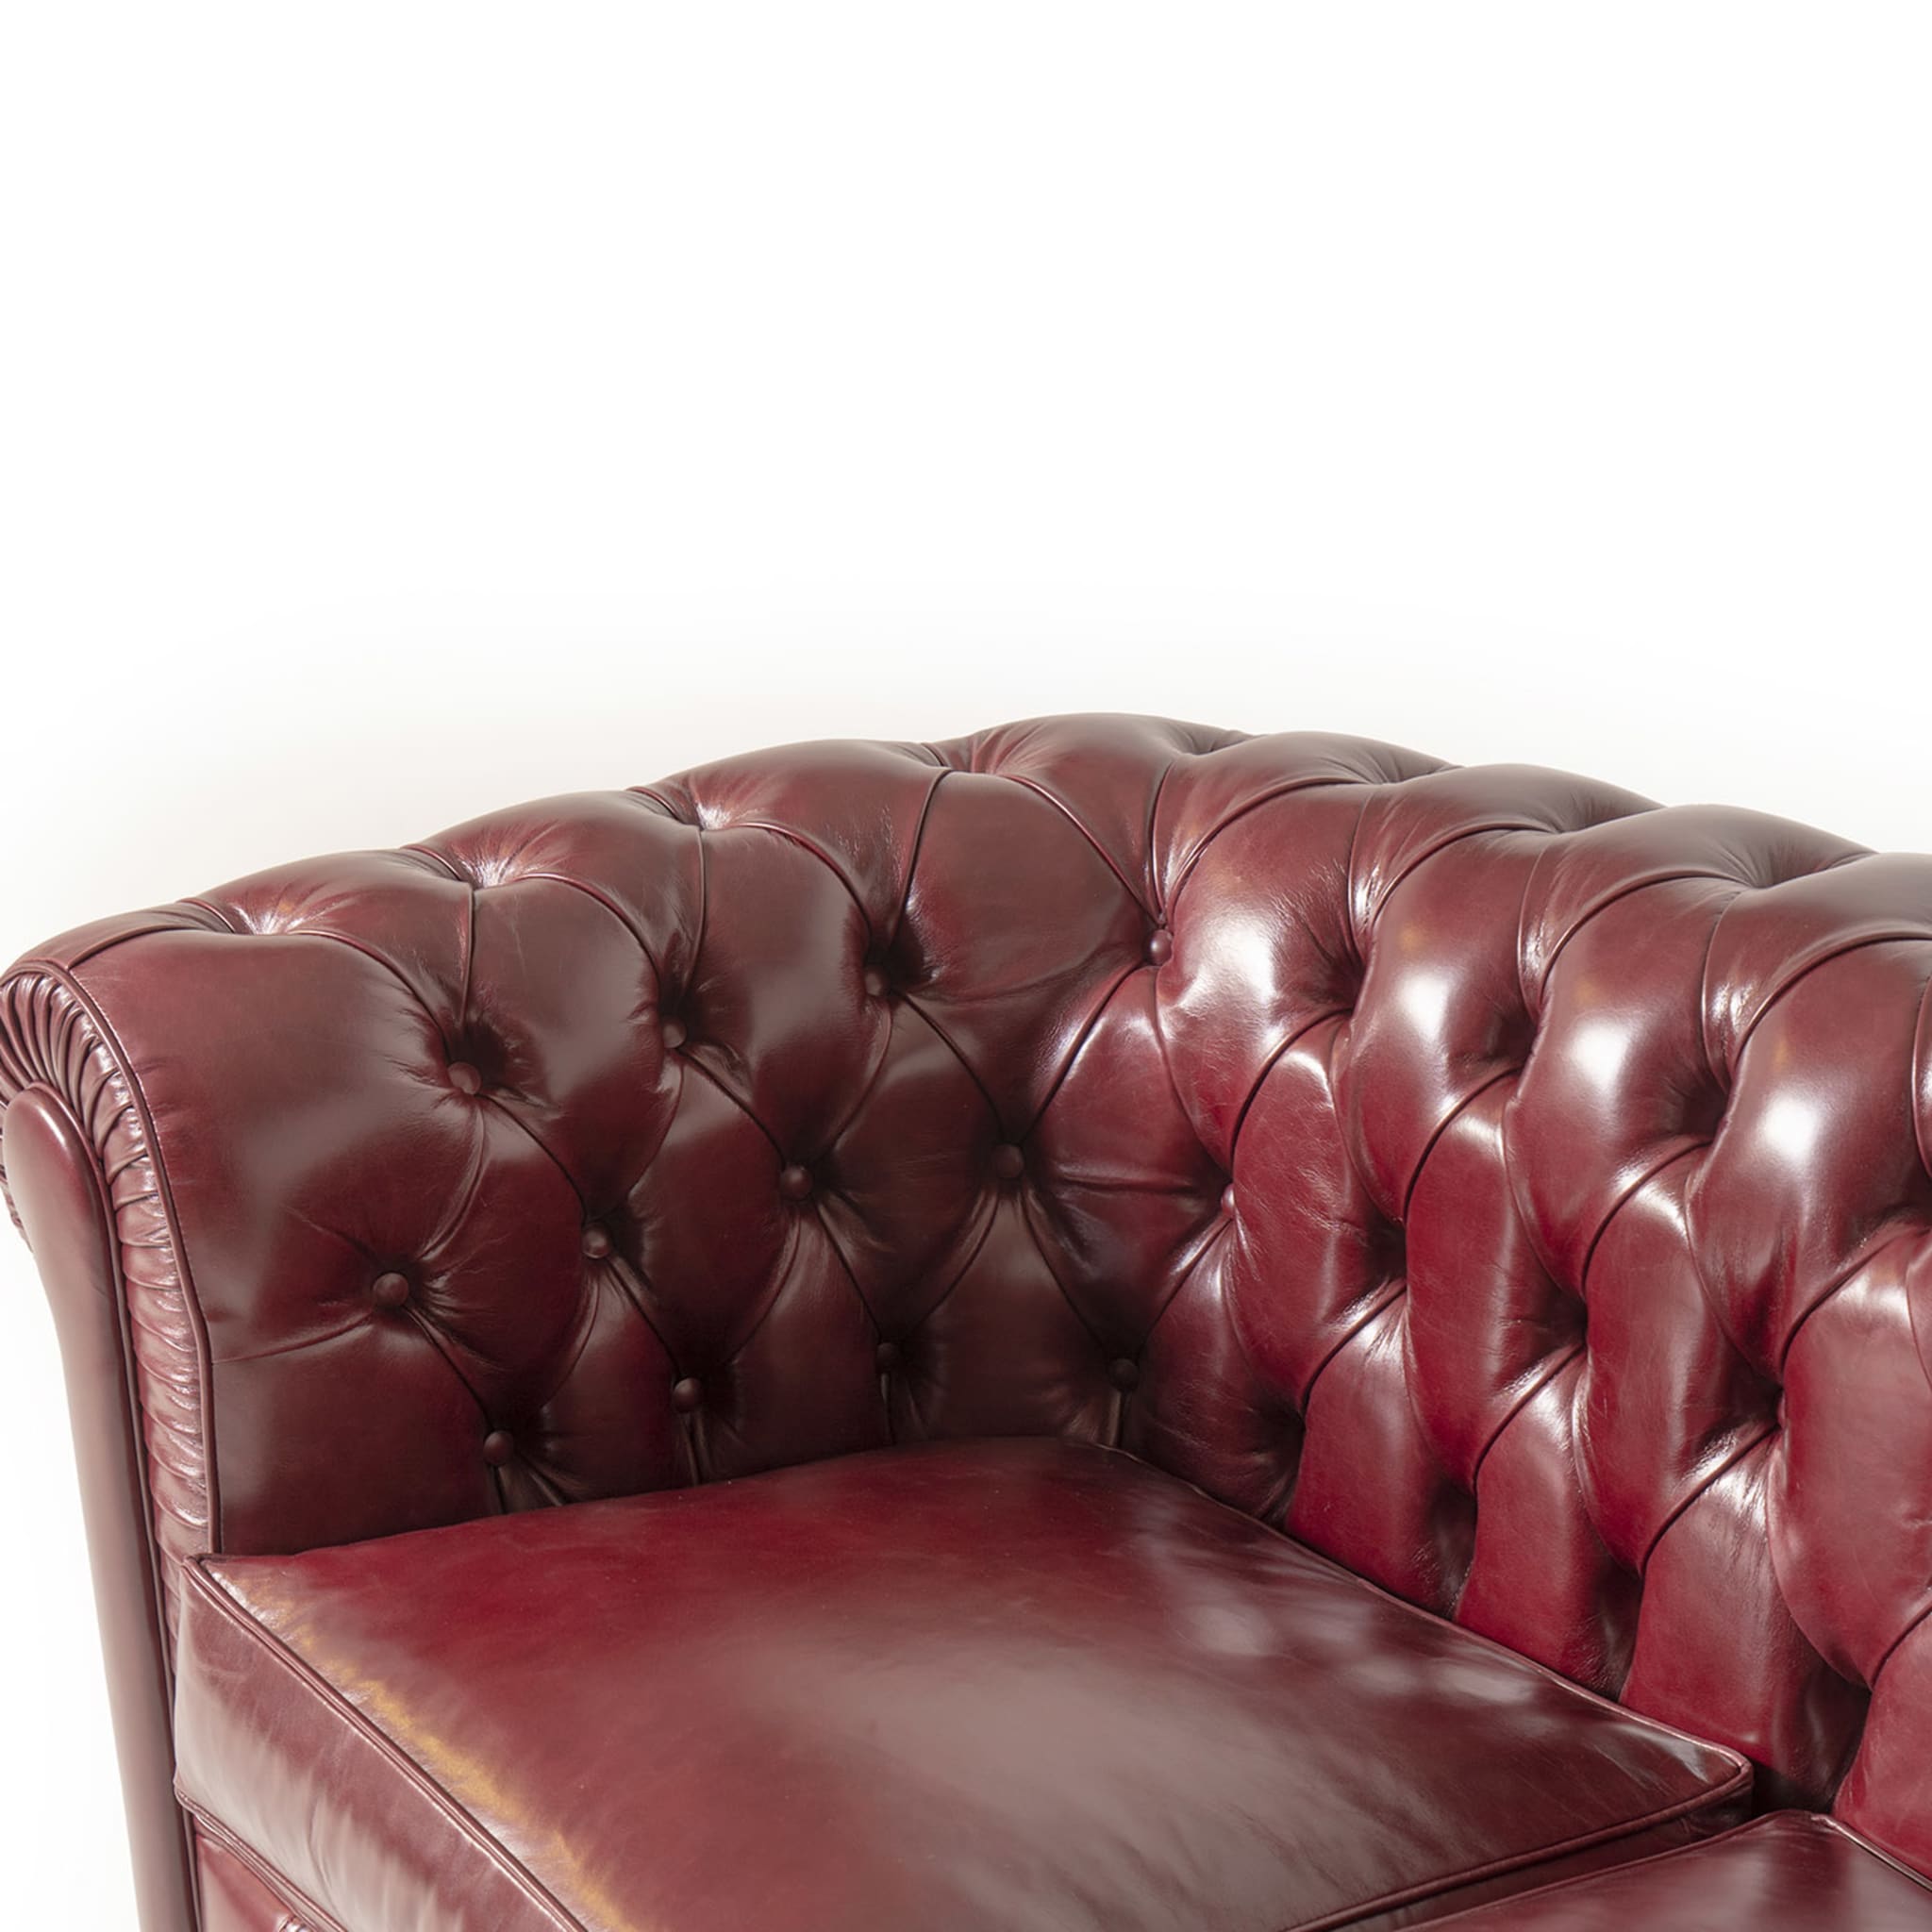 Chesterfield Bordeaux Leather Sofa - Alternative view 3